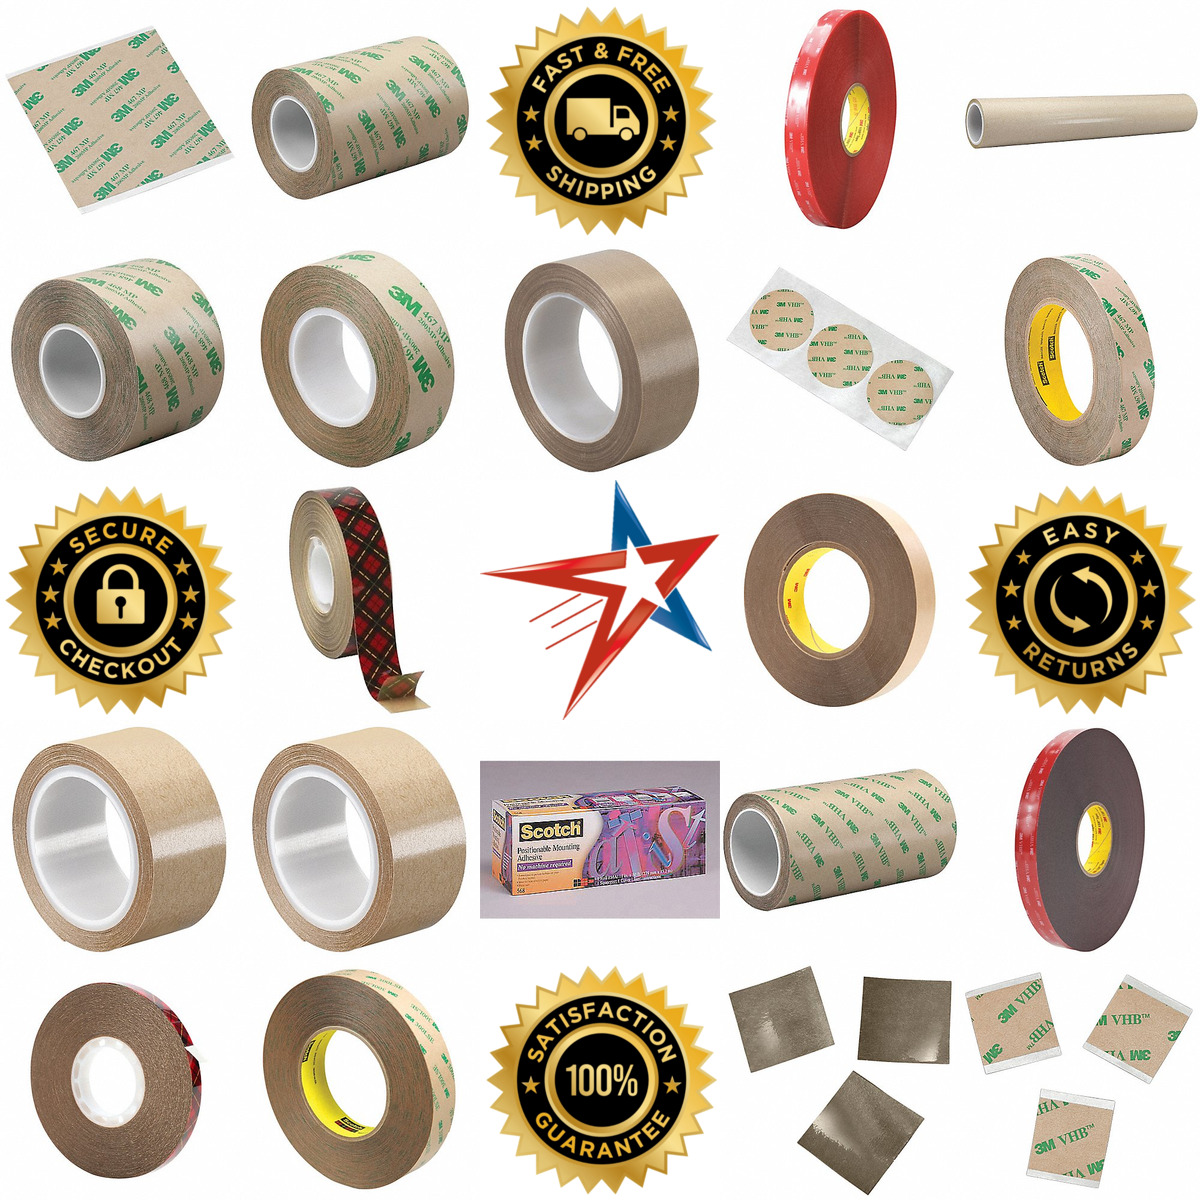 A selection of Transfer Tape products on GoVets